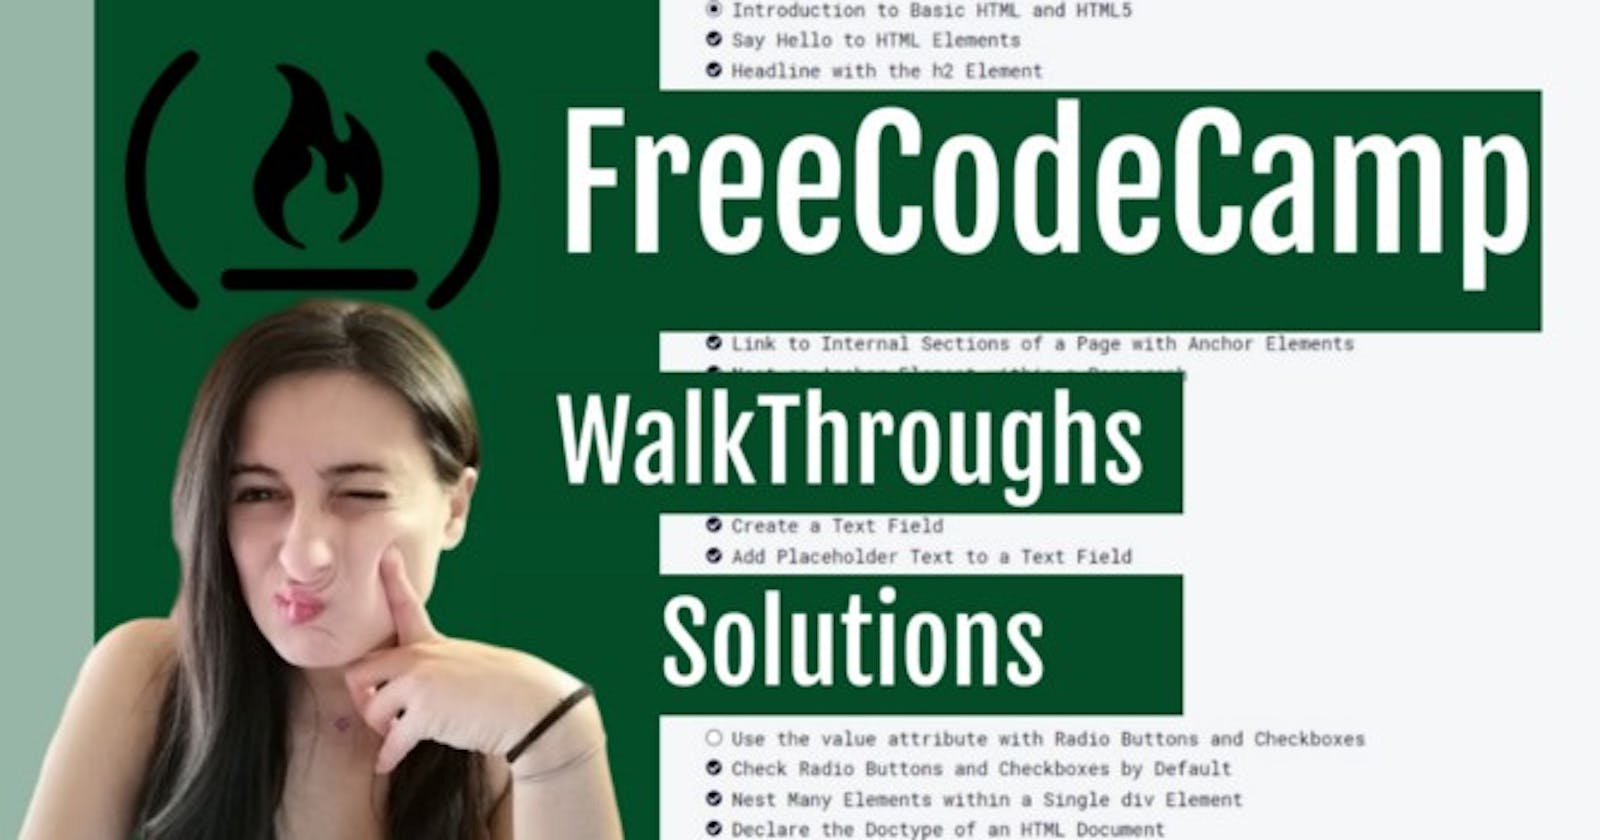 FreeCodeCamp: Walkthroughs & Solutions (31 videos) 💪>7hours of content 🤓